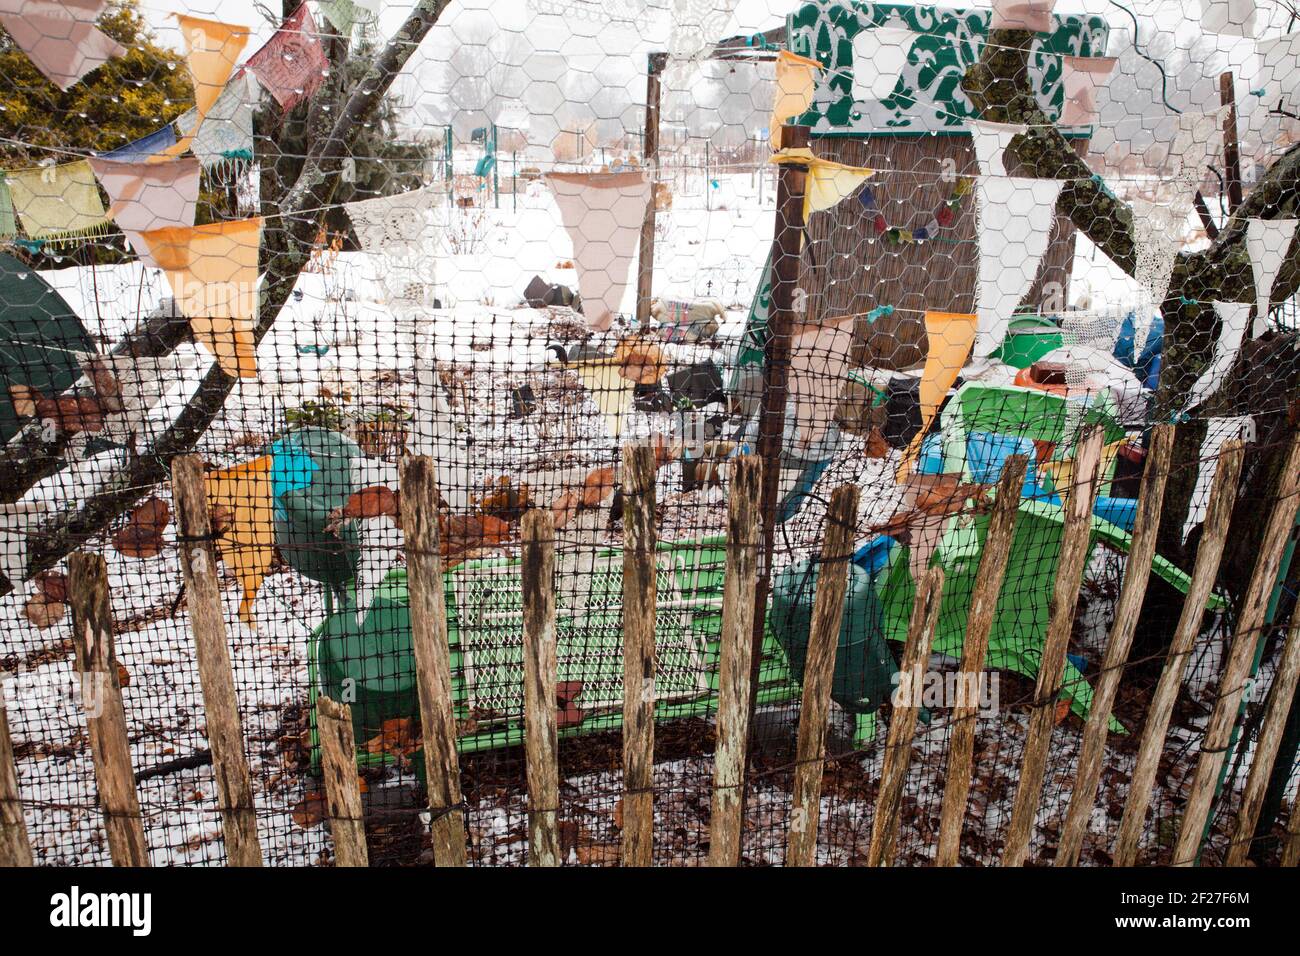 Eclectic fence and decoration in a New England community garden in the winter. Stock Photo